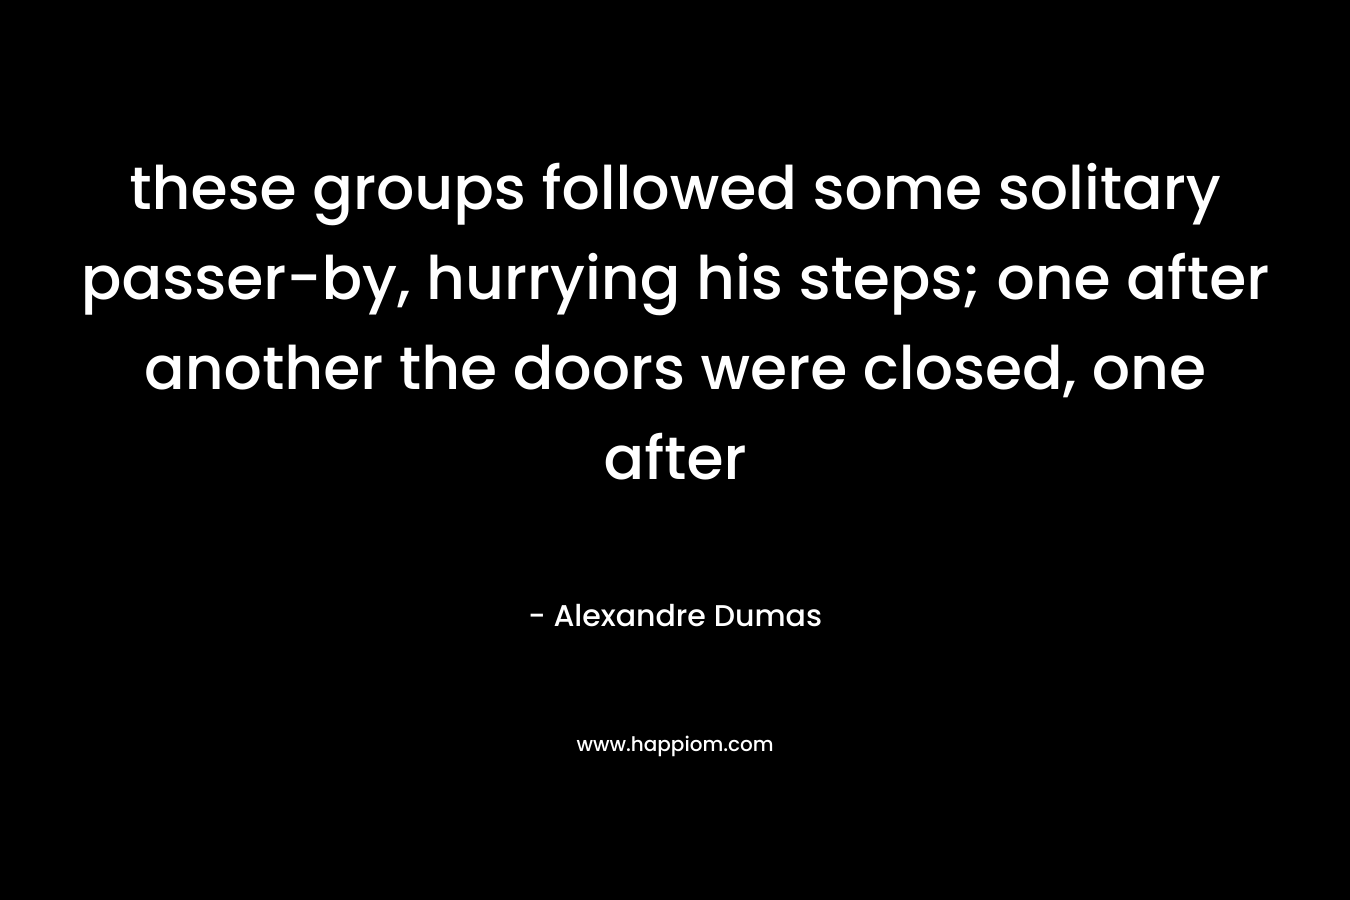 these groups followed some solitary passer-by, hurrying his steps; one after another the doors were closed, one after – Alexandre Dumas